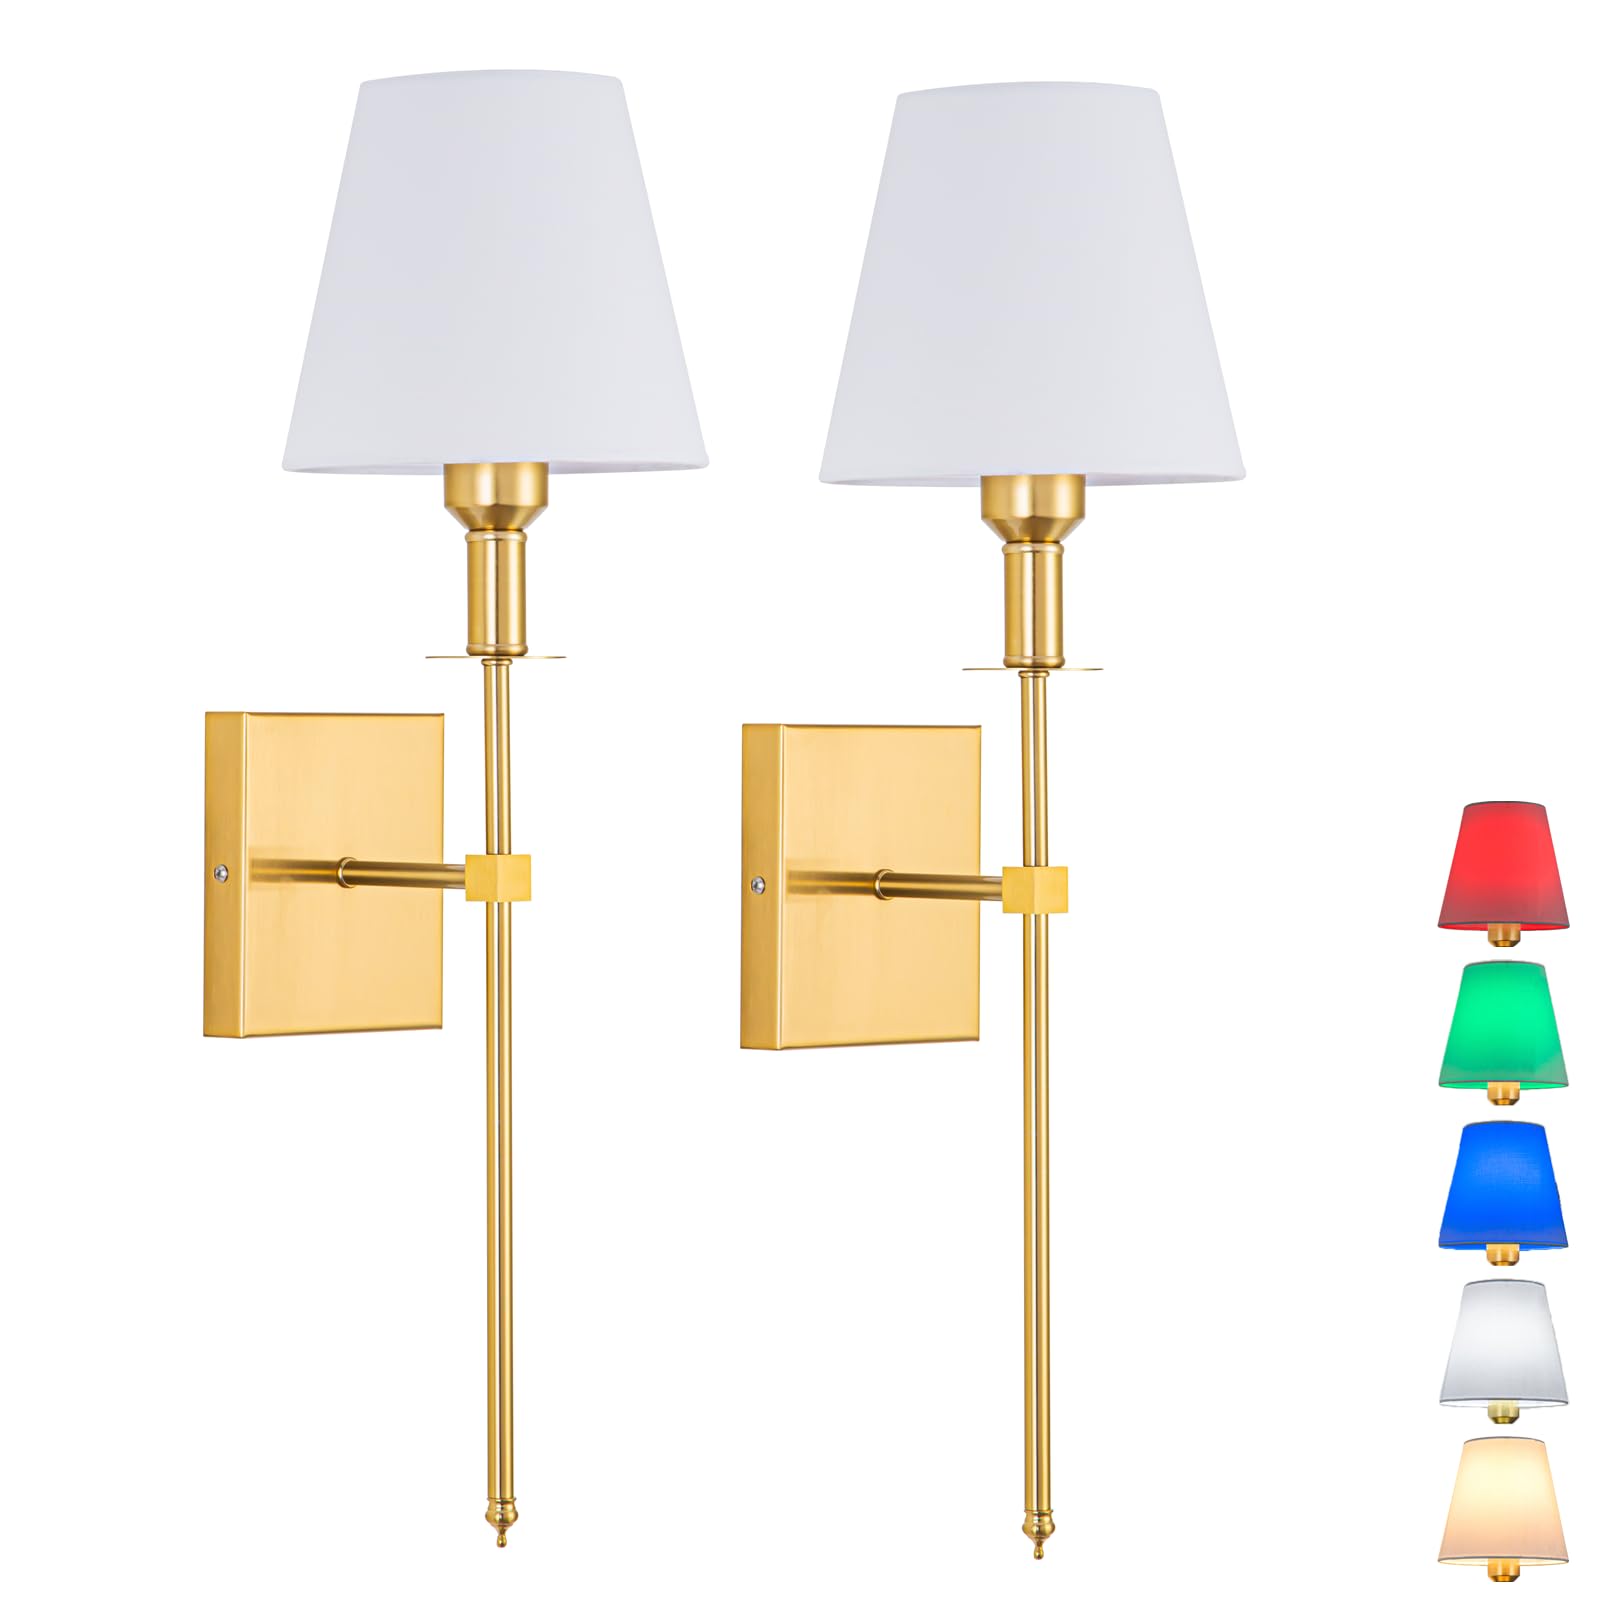 Wall Light Battery Operated Sconce Set Of 2，not Hardwired Fixture,Battery Powered Wall Sconce With Remote Dimmable Light Bulb,Easy To Install Not Wires,for Bedroom, Lounge, Farmhouse ( Color : Gold )